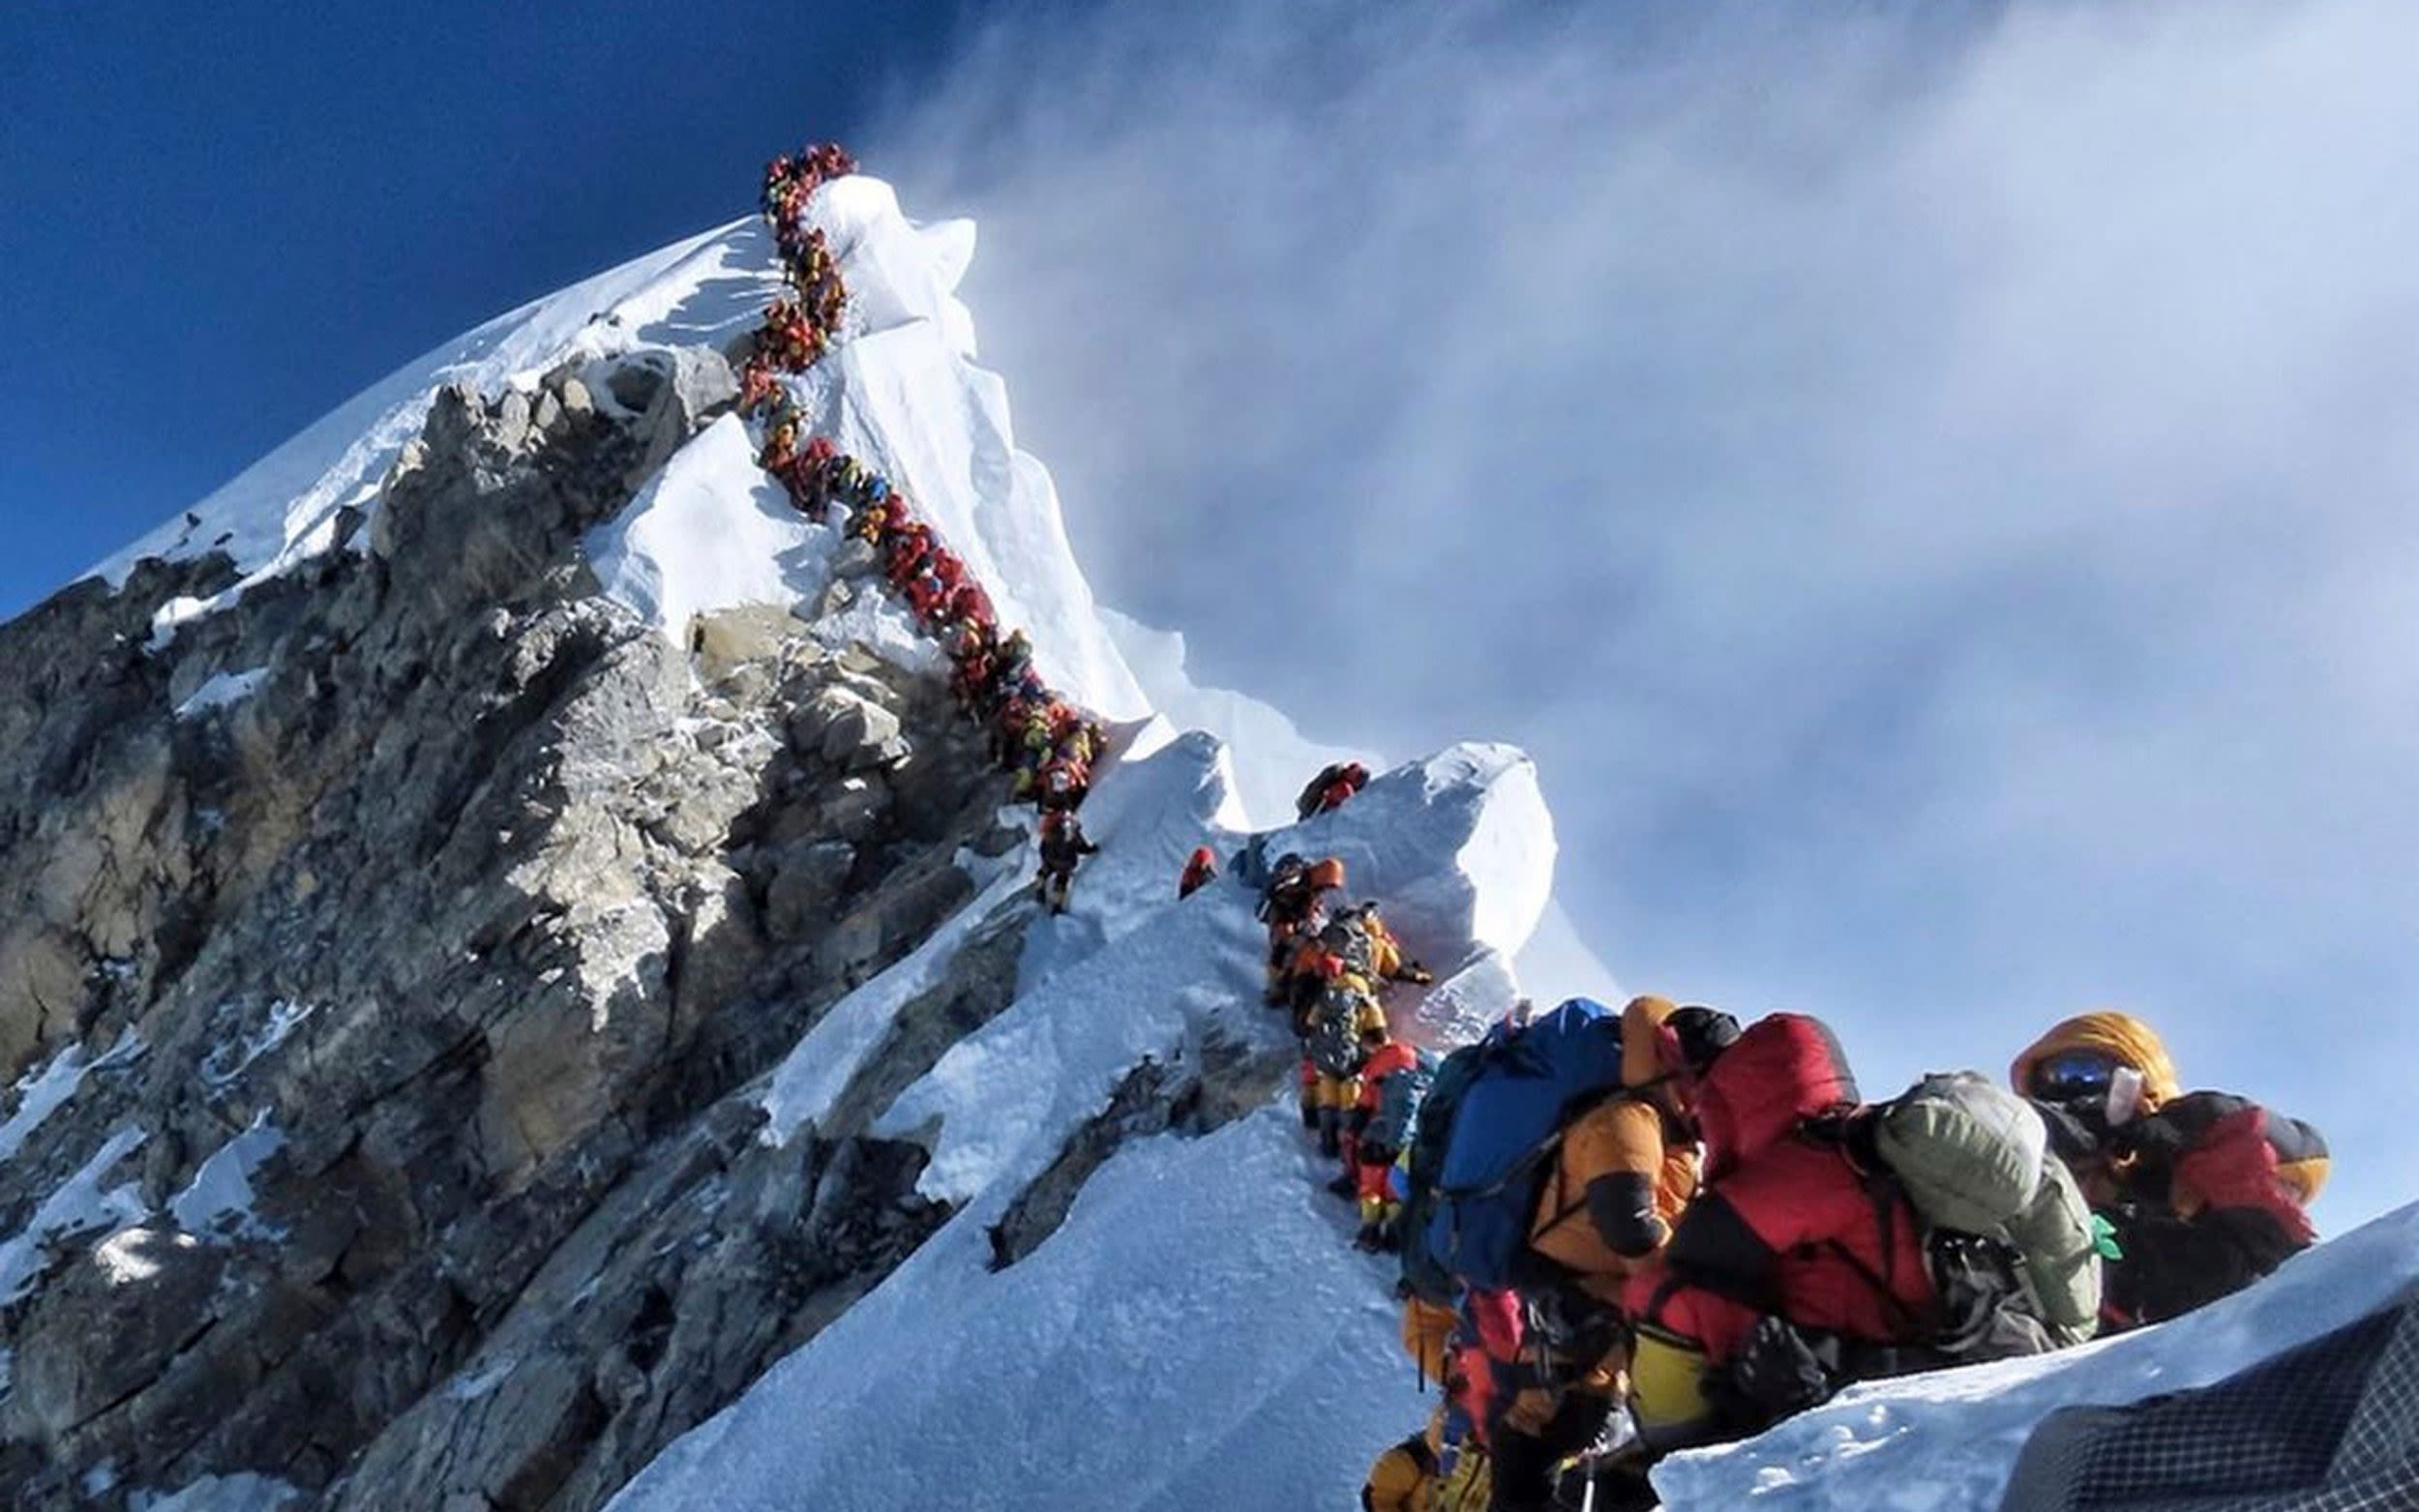 Poo bags and GPS trackers among new plans to fix overtourism on Everest